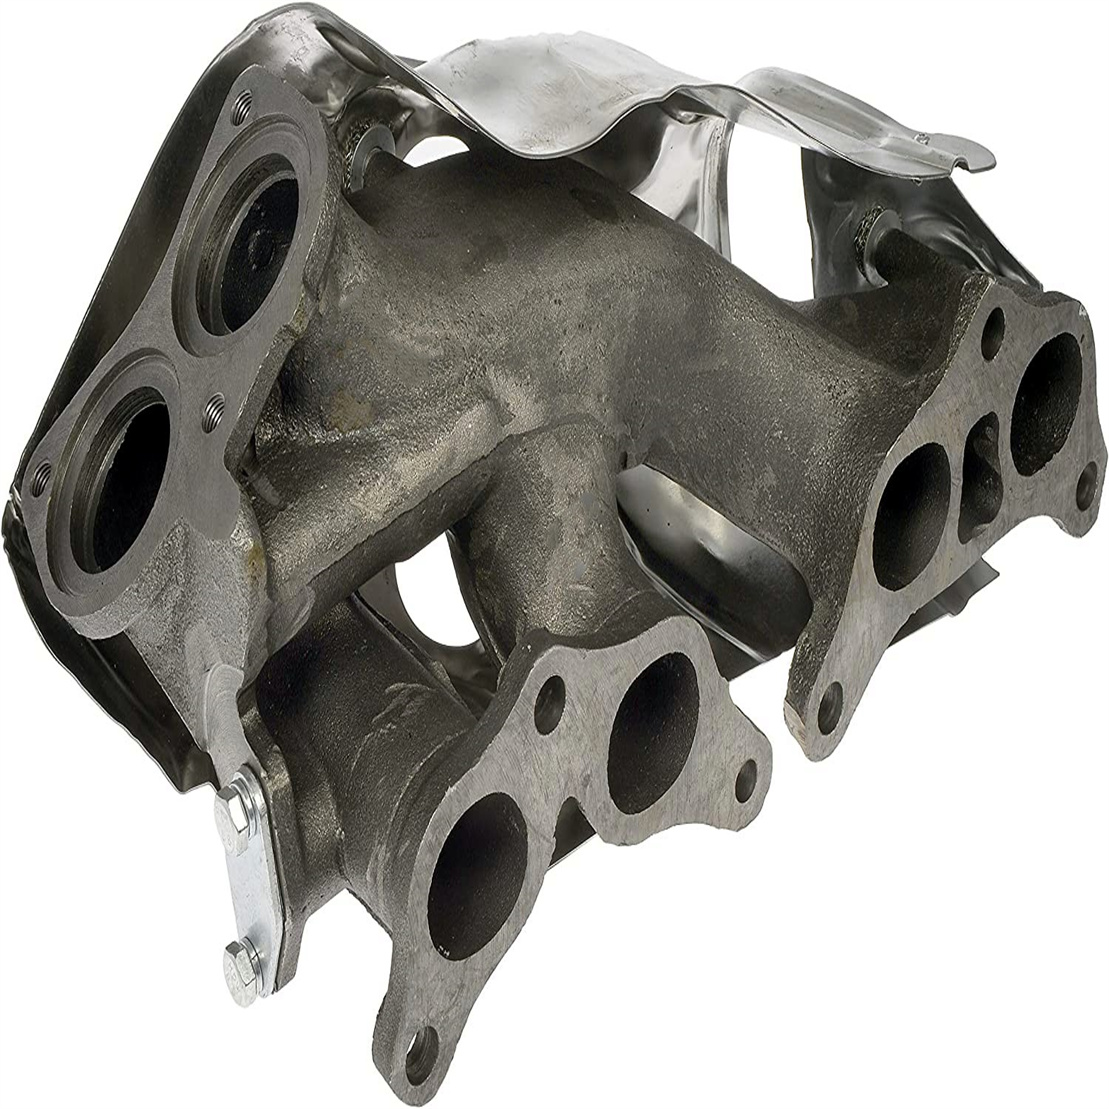 Vibracoustic meets EV performance demands with new chassis bushings | Rubber News